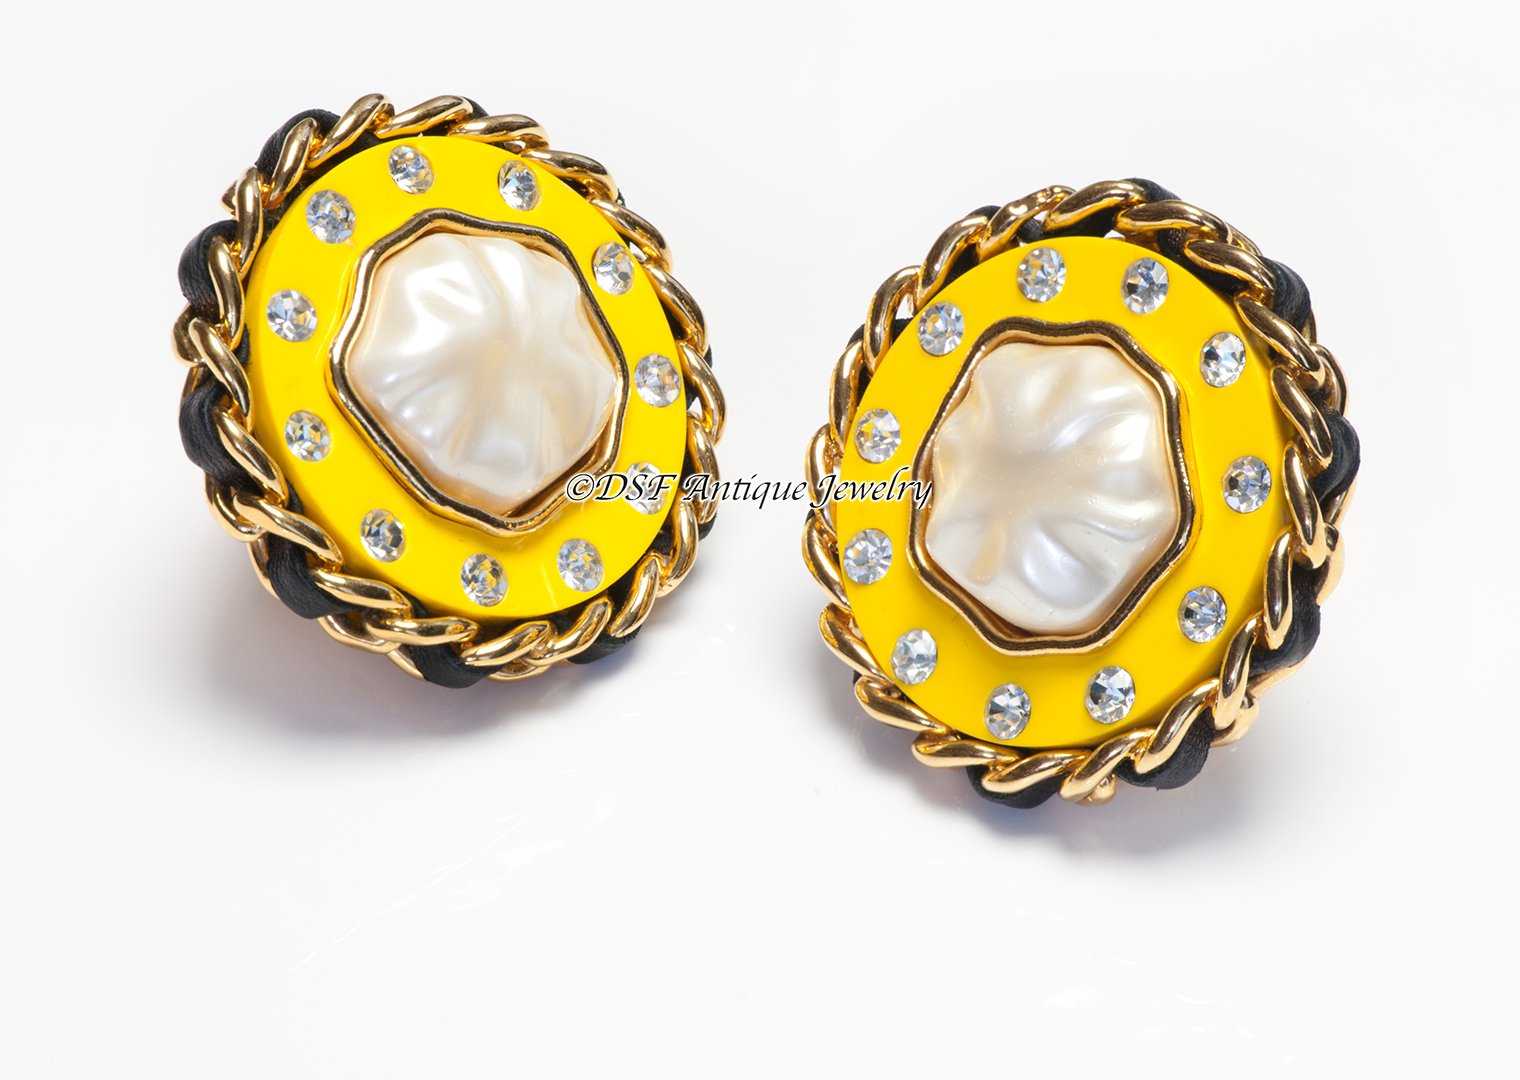 Chanel Paris Fall 1991 Yellow Resin Pearl Crystal Leather Chain Earrings